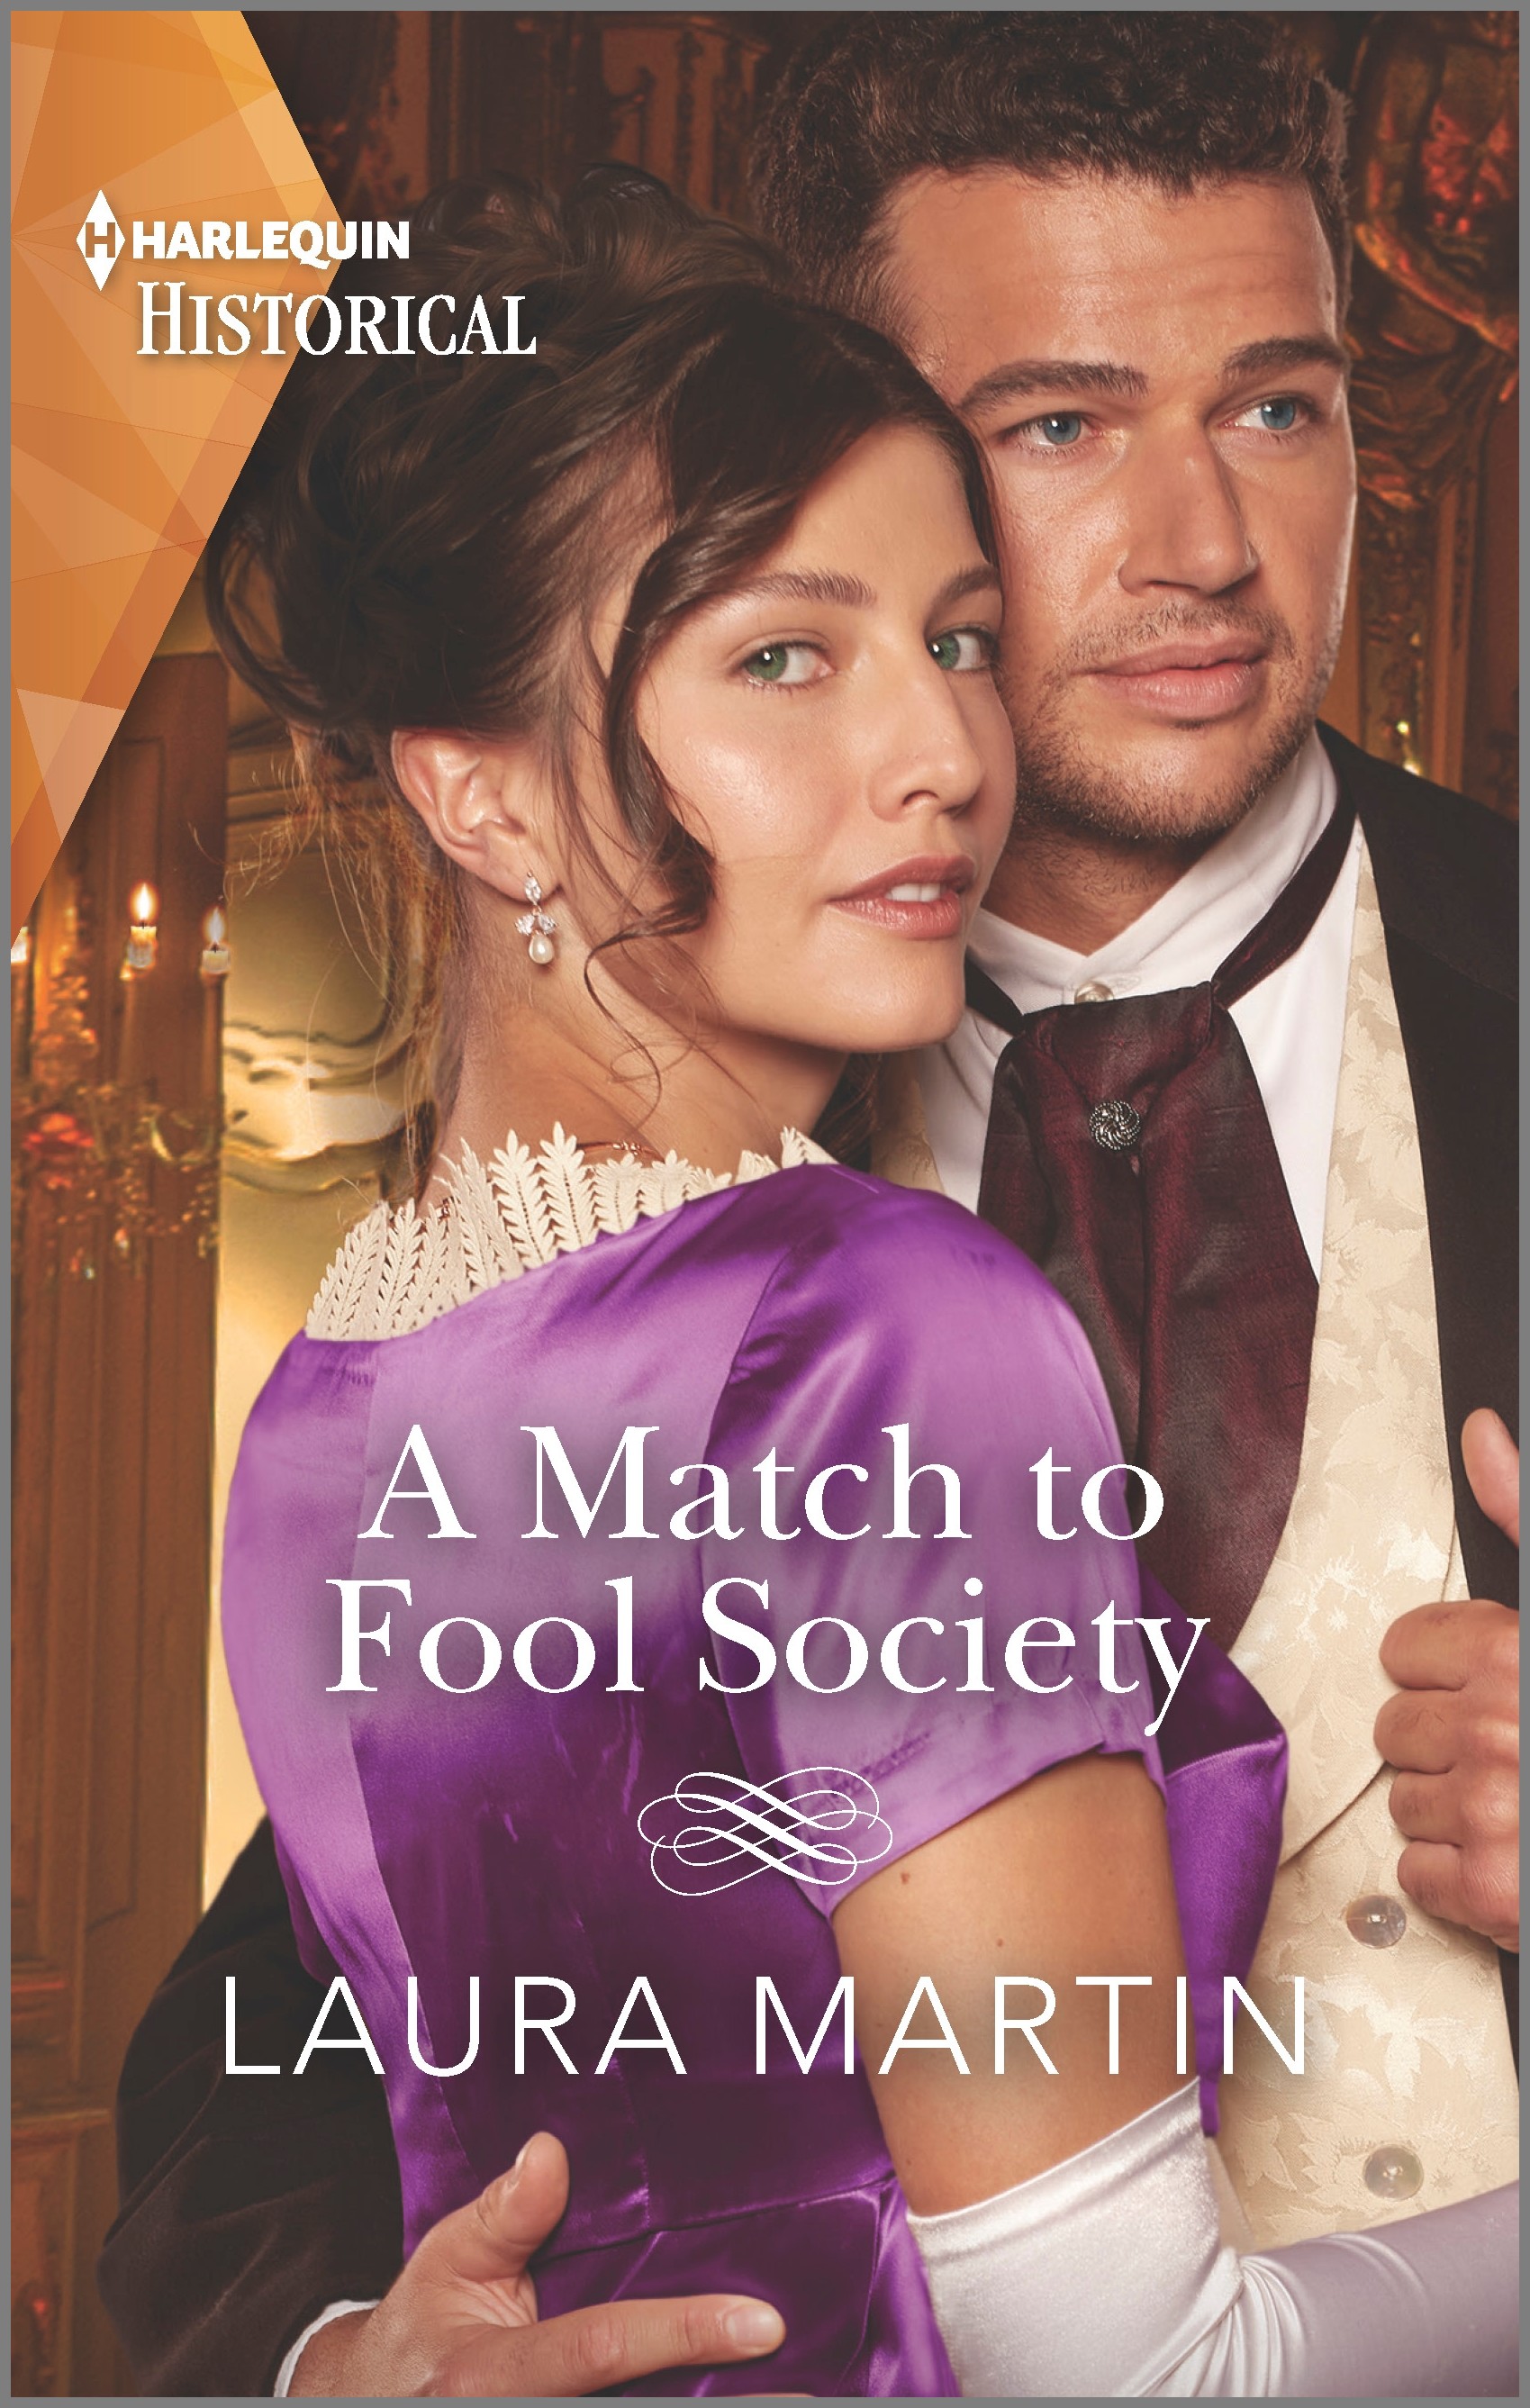 A MATCH TO FOOL SOCIETY by Laura Martin